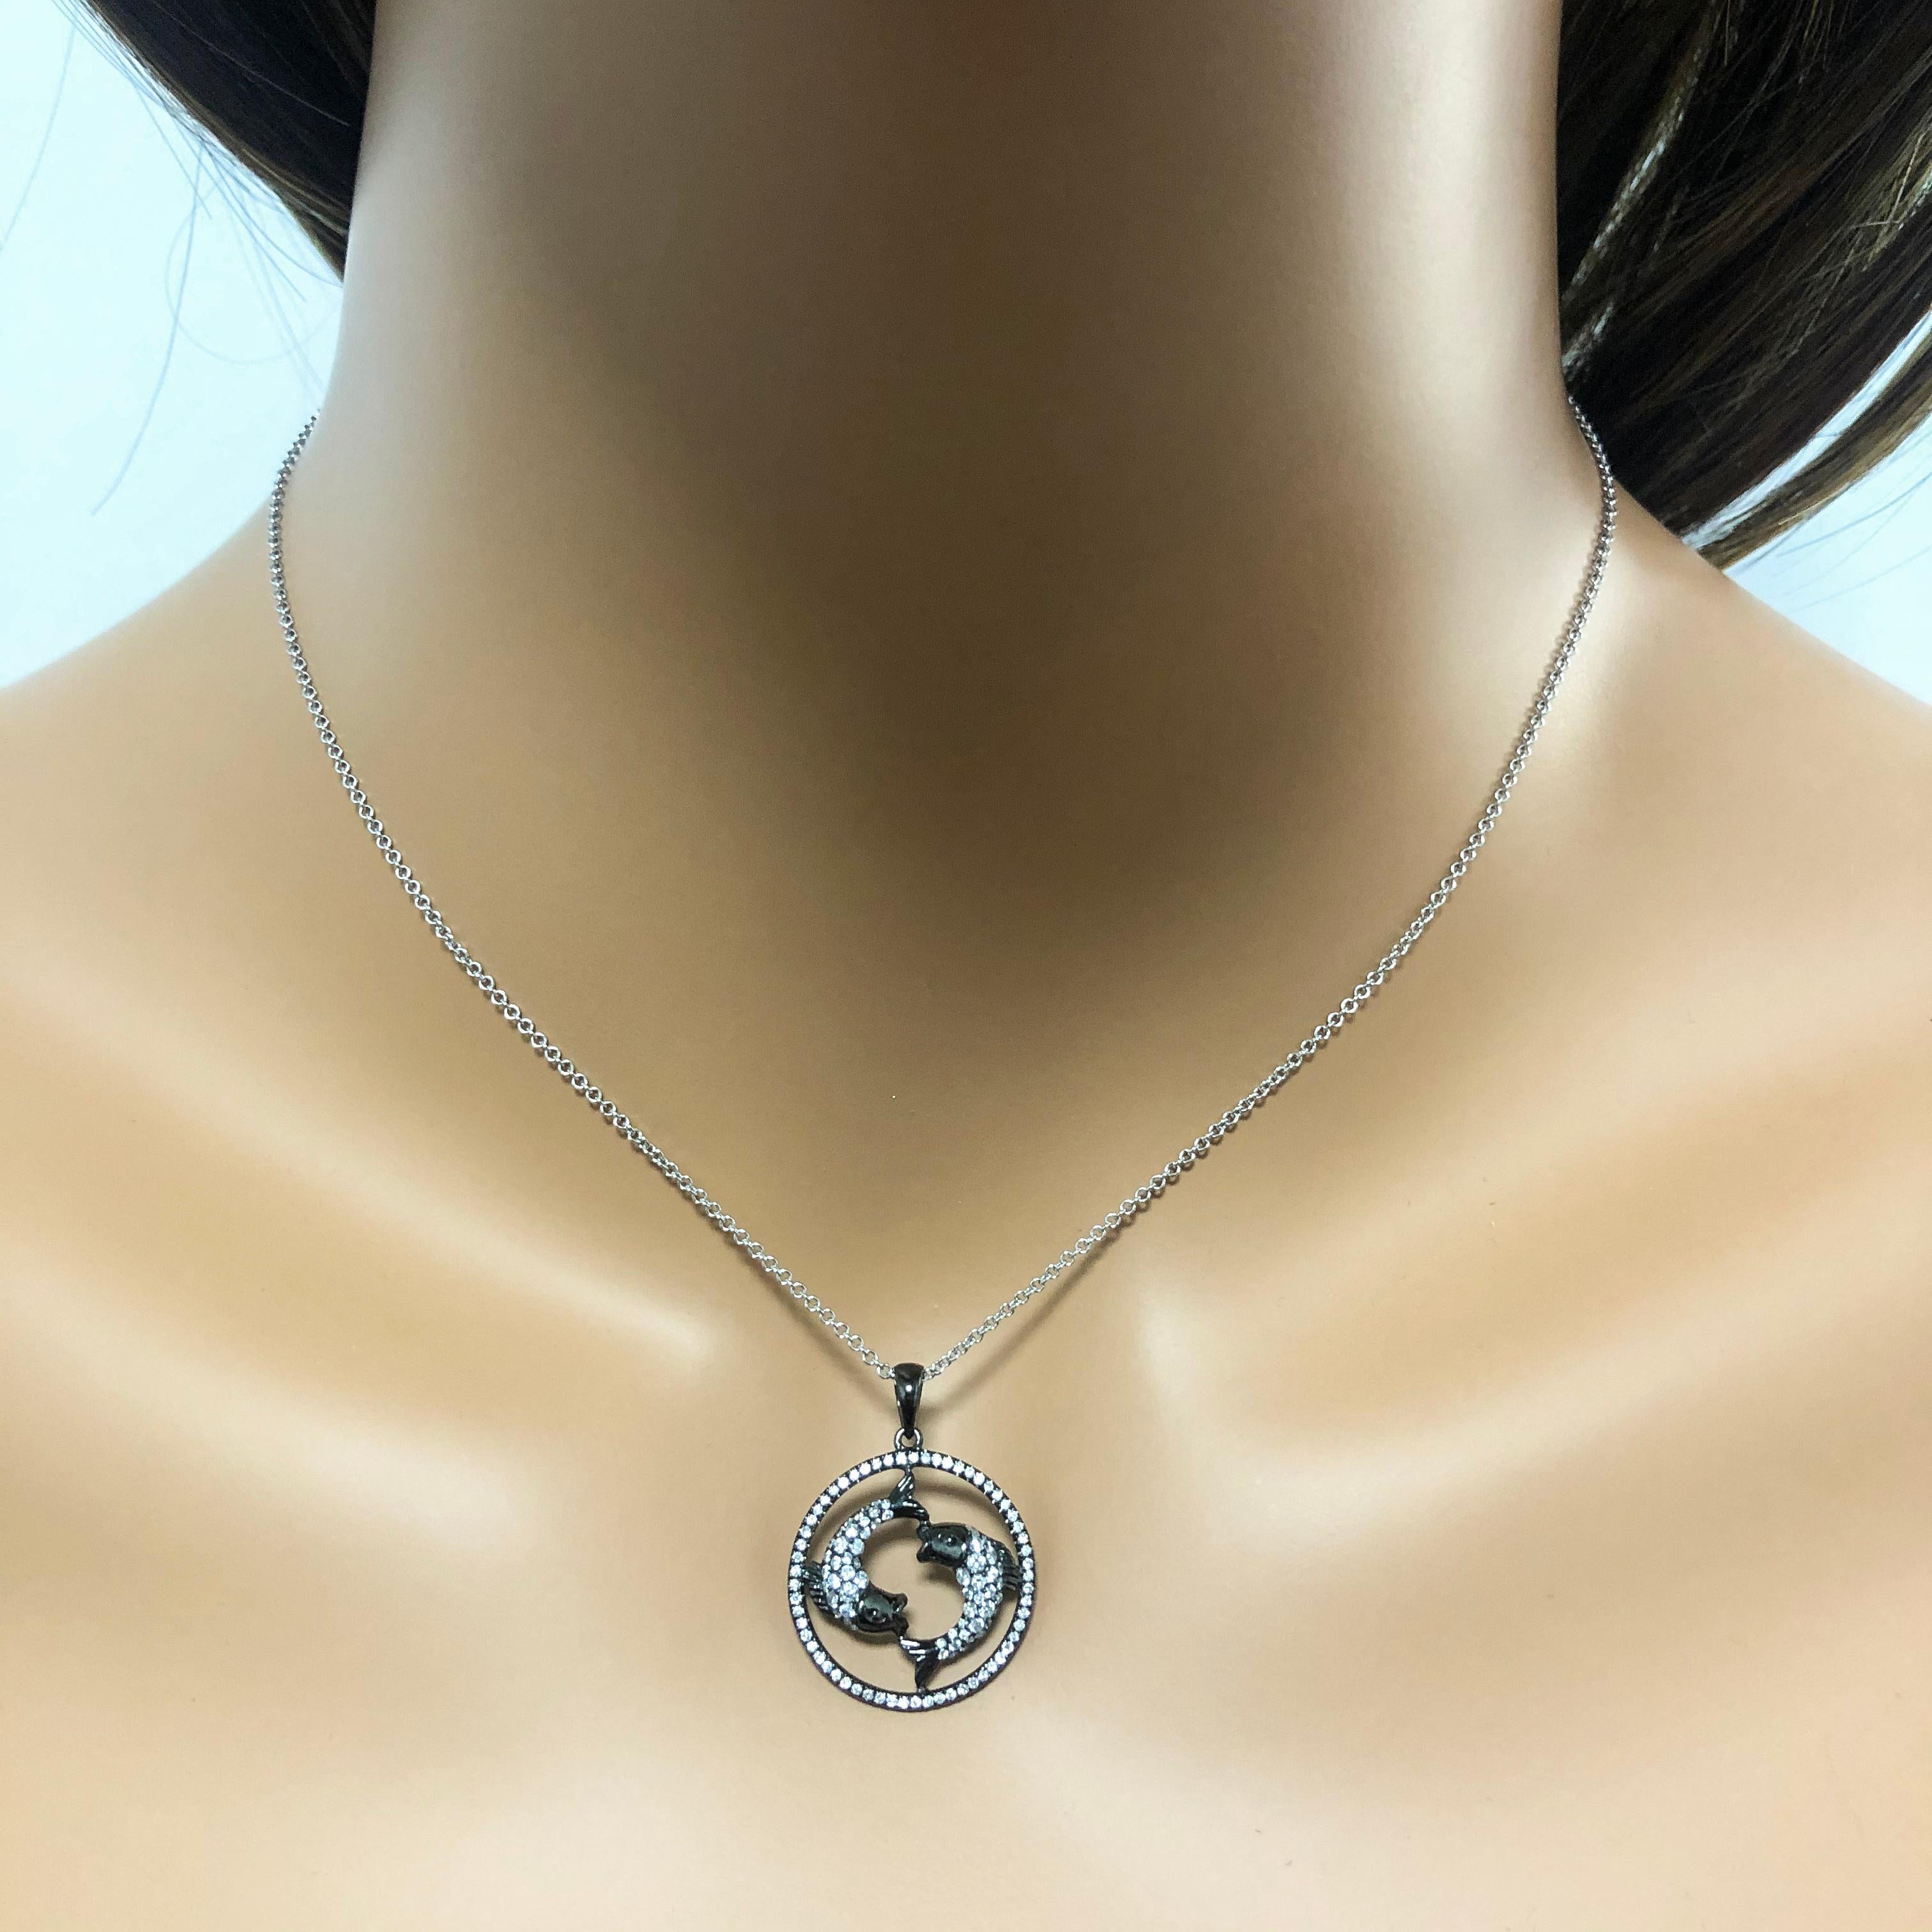 An elegant Pisces zodiac necklace set with sparkling round diamonds weighing 0.52 carats total.  Made with 18k gold, plated with black rhodium. Comes with 16 inch white gold chain. This is a perfect birthday gift for people who celebrate birthdays